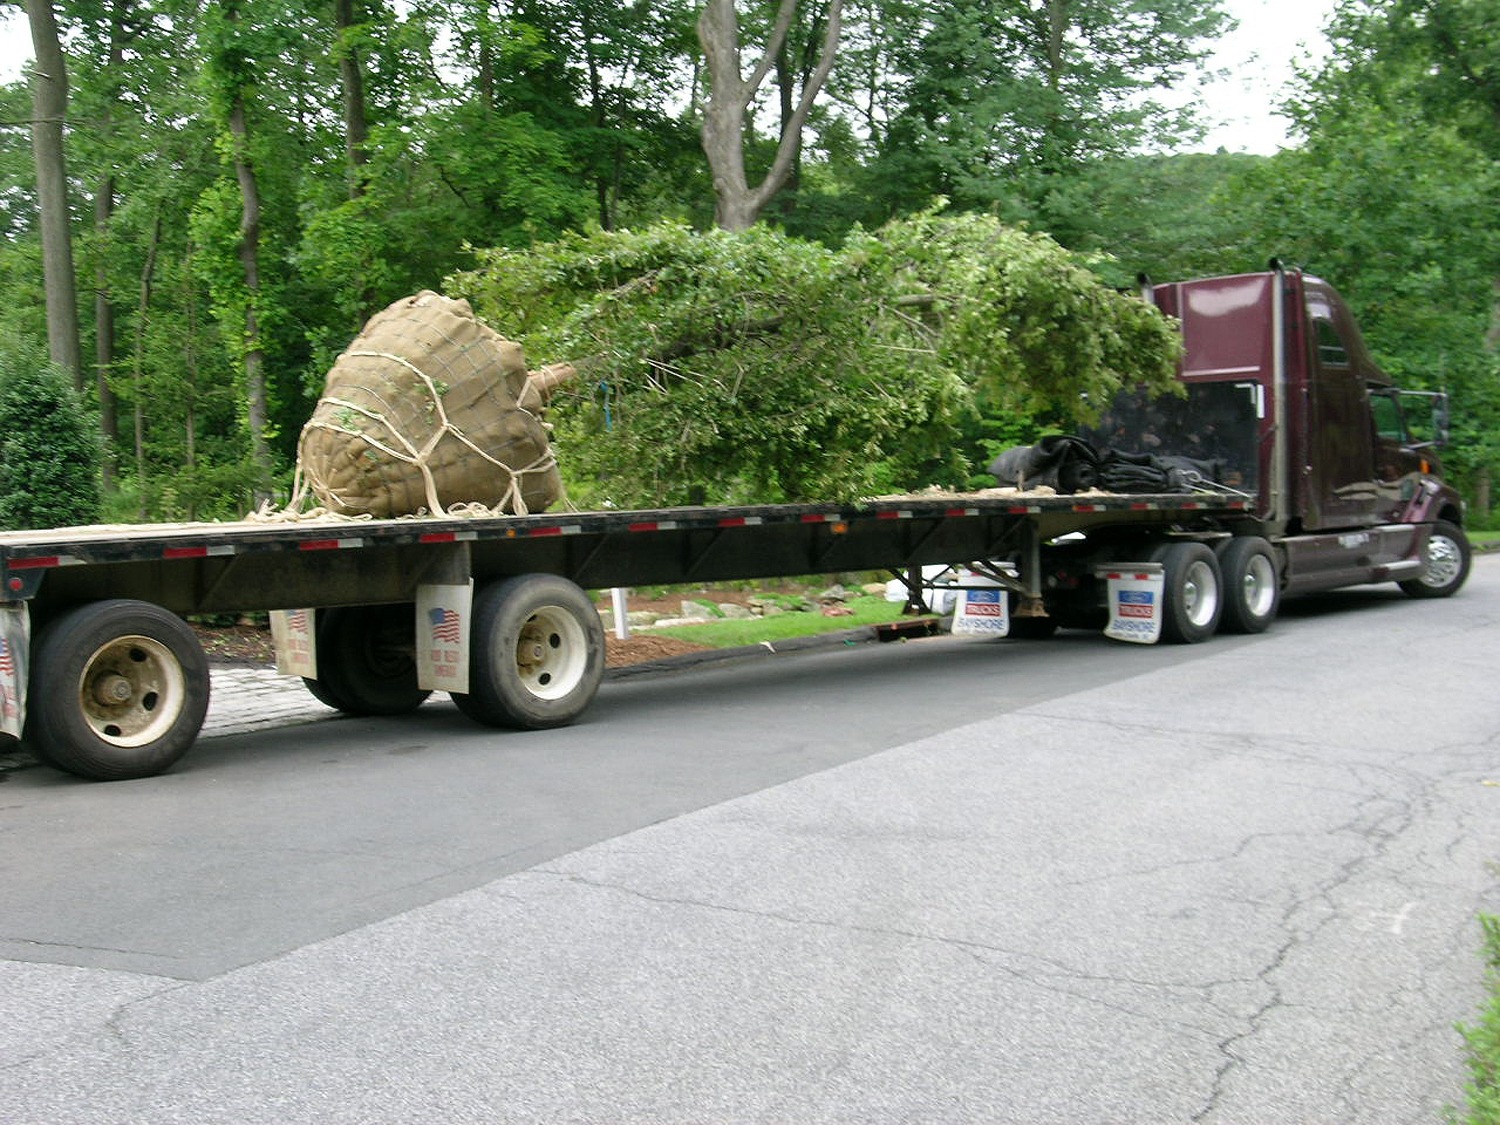 A flatbed truck is carrying a large, root-balled tree and some shrubs. The truck is parked on a suburban road beside lush greenery.